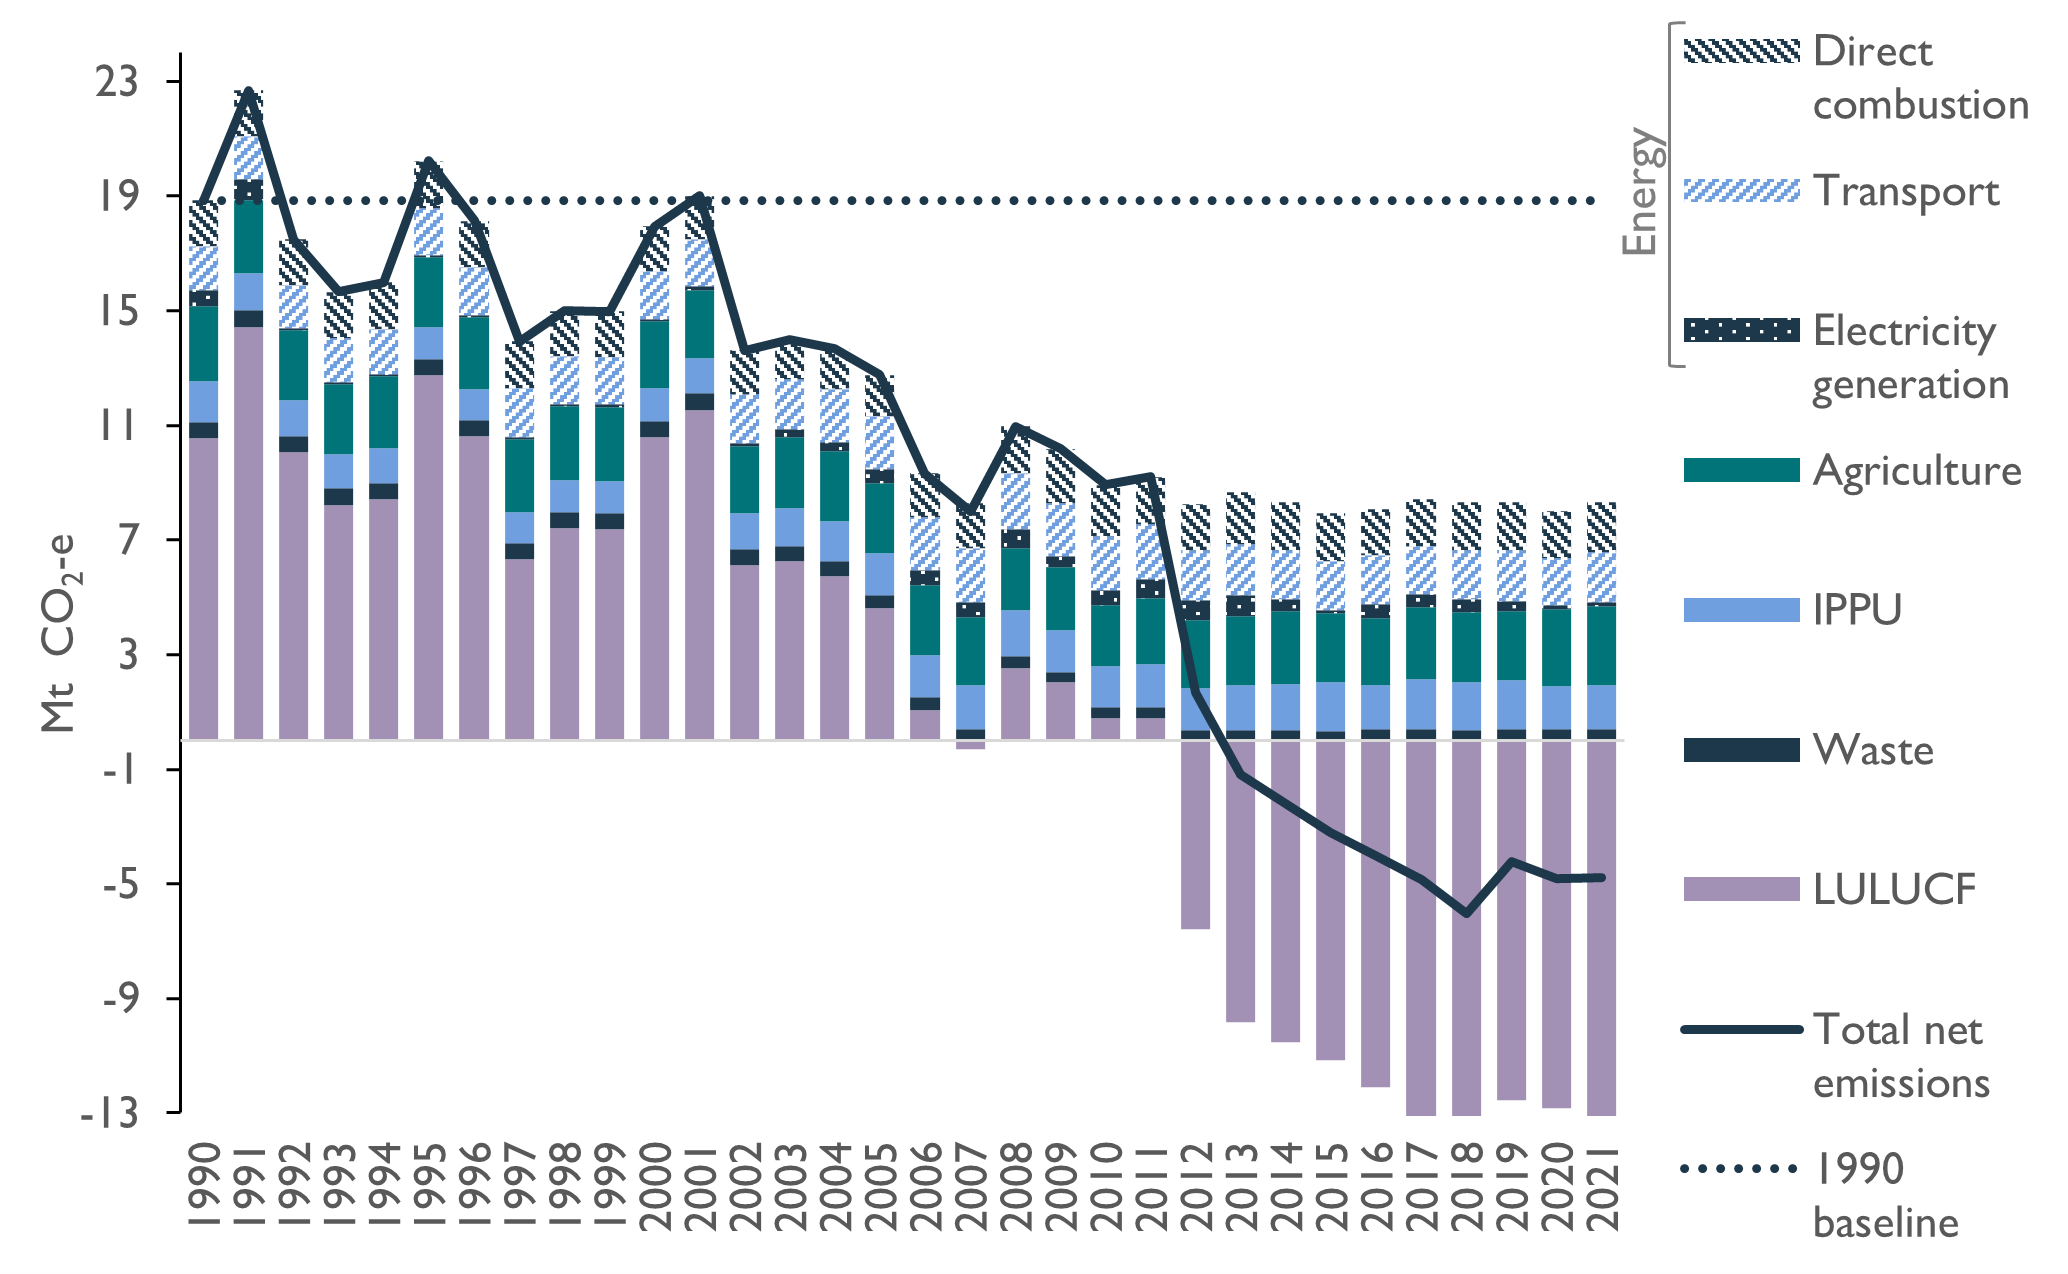 This figure combines a stacked bar chart, showing the change in sectoral and energy sub-sectoral annual greenhouse gas emissions, with a line graph showing total net emissions, from 1990 to 2021. It shows the decline in Tasmania's net emissions, from 18.85 Mt CO2-e in 1990, peaking at 22.69 Mt CO2-e in 1991, declining then rising slightly to 20.23 Mt CO2-e in 1995, declining and rising again to 18.85 Mt CO2-e in 2001 before declining to minus 4.80 Mt CO2-e in 2021. It shows that the Land Use, Land Use Change and Forestry sector (LULUCF) was largely responsible for the changes in Tasmania's total net emissions, with LULUCF emissions reaching a peak of 14.44 Mt CO2-e in 1991, declining then rising slightly to 12.76 Mt CO2-e in 1995, declining and rising again to 11.53 Mt CO2-e in 2001, before declining to become a net carbon sink, first in 2007, and again from 2012, reaching a minimum of minus 13.13 Mt CO2-e in 2021.